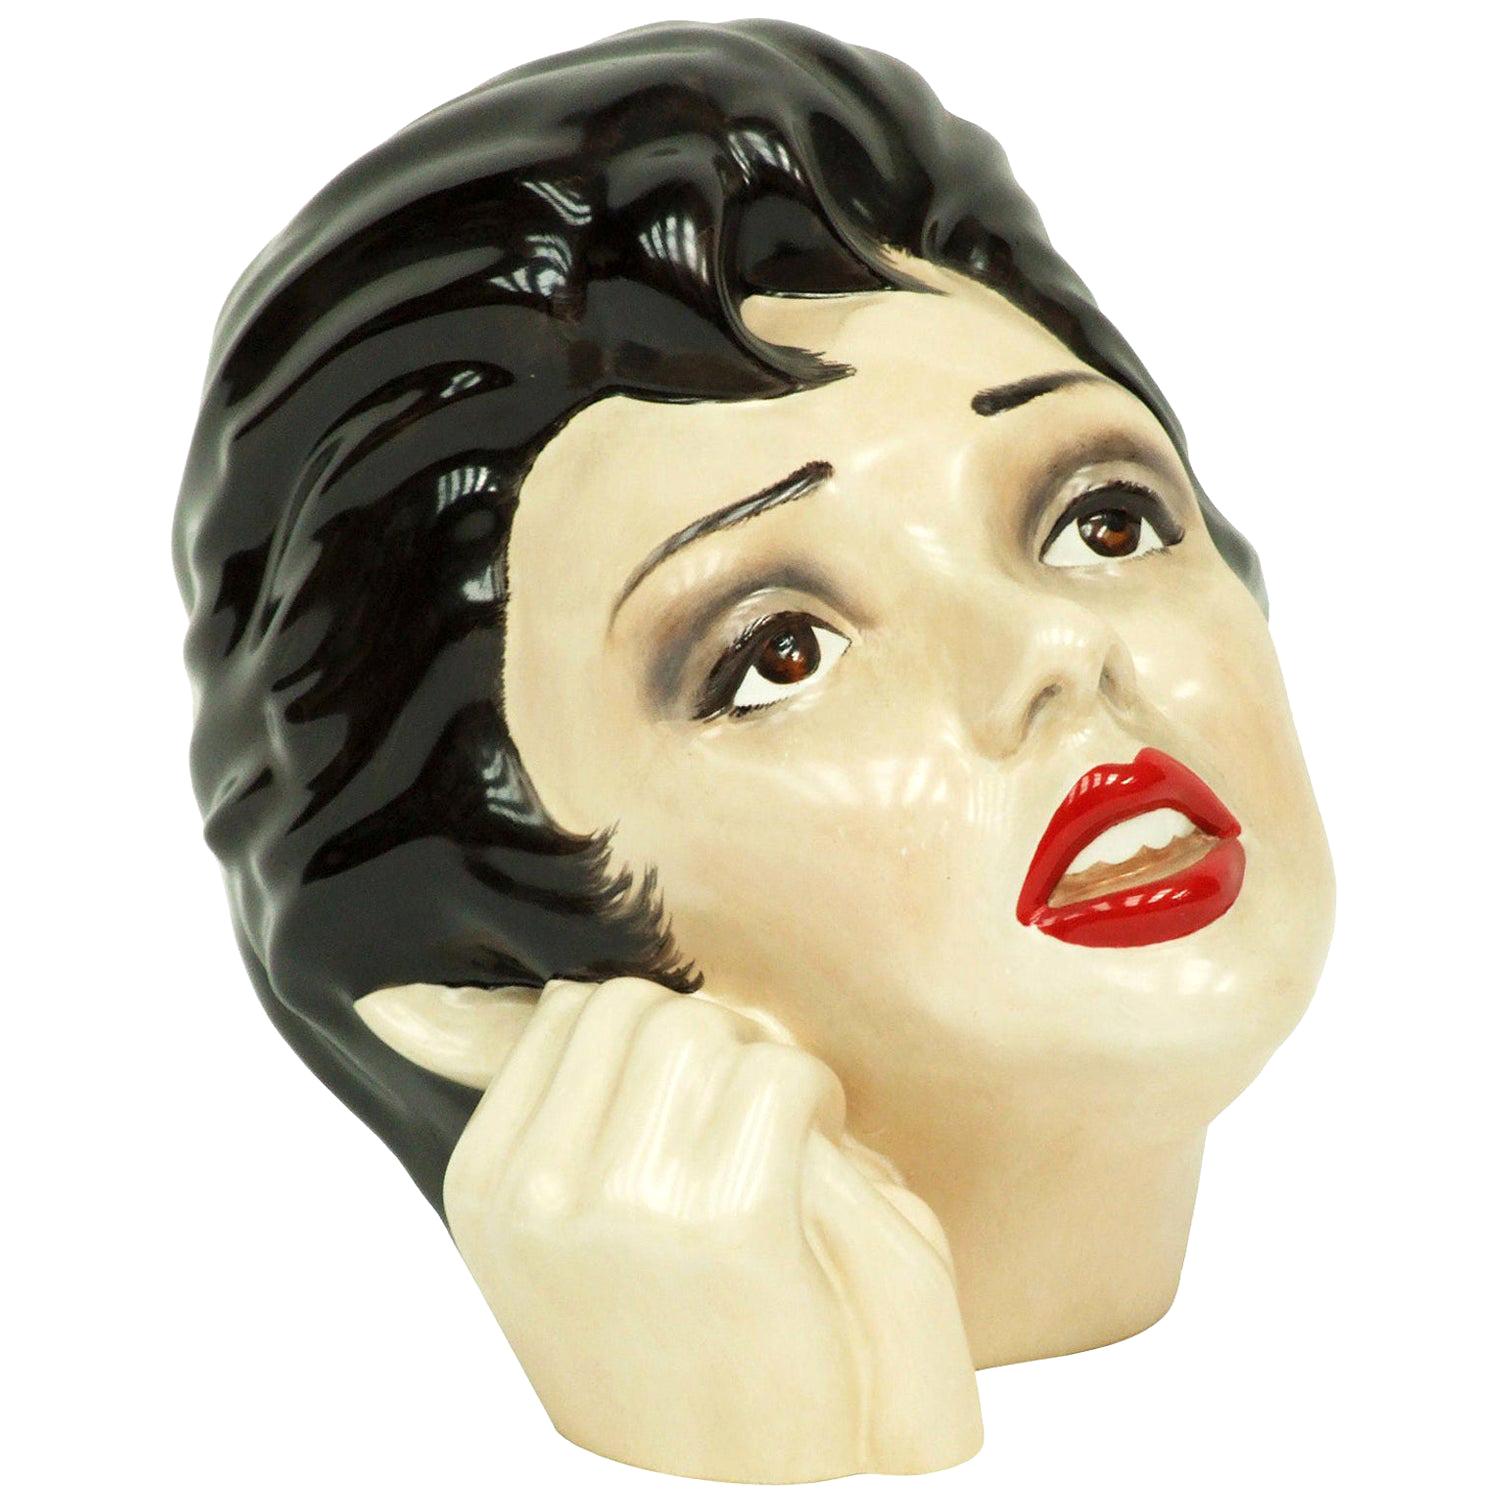 1970s Judy Garland Ceramic Bust by Morris Rushton for Fleshpots